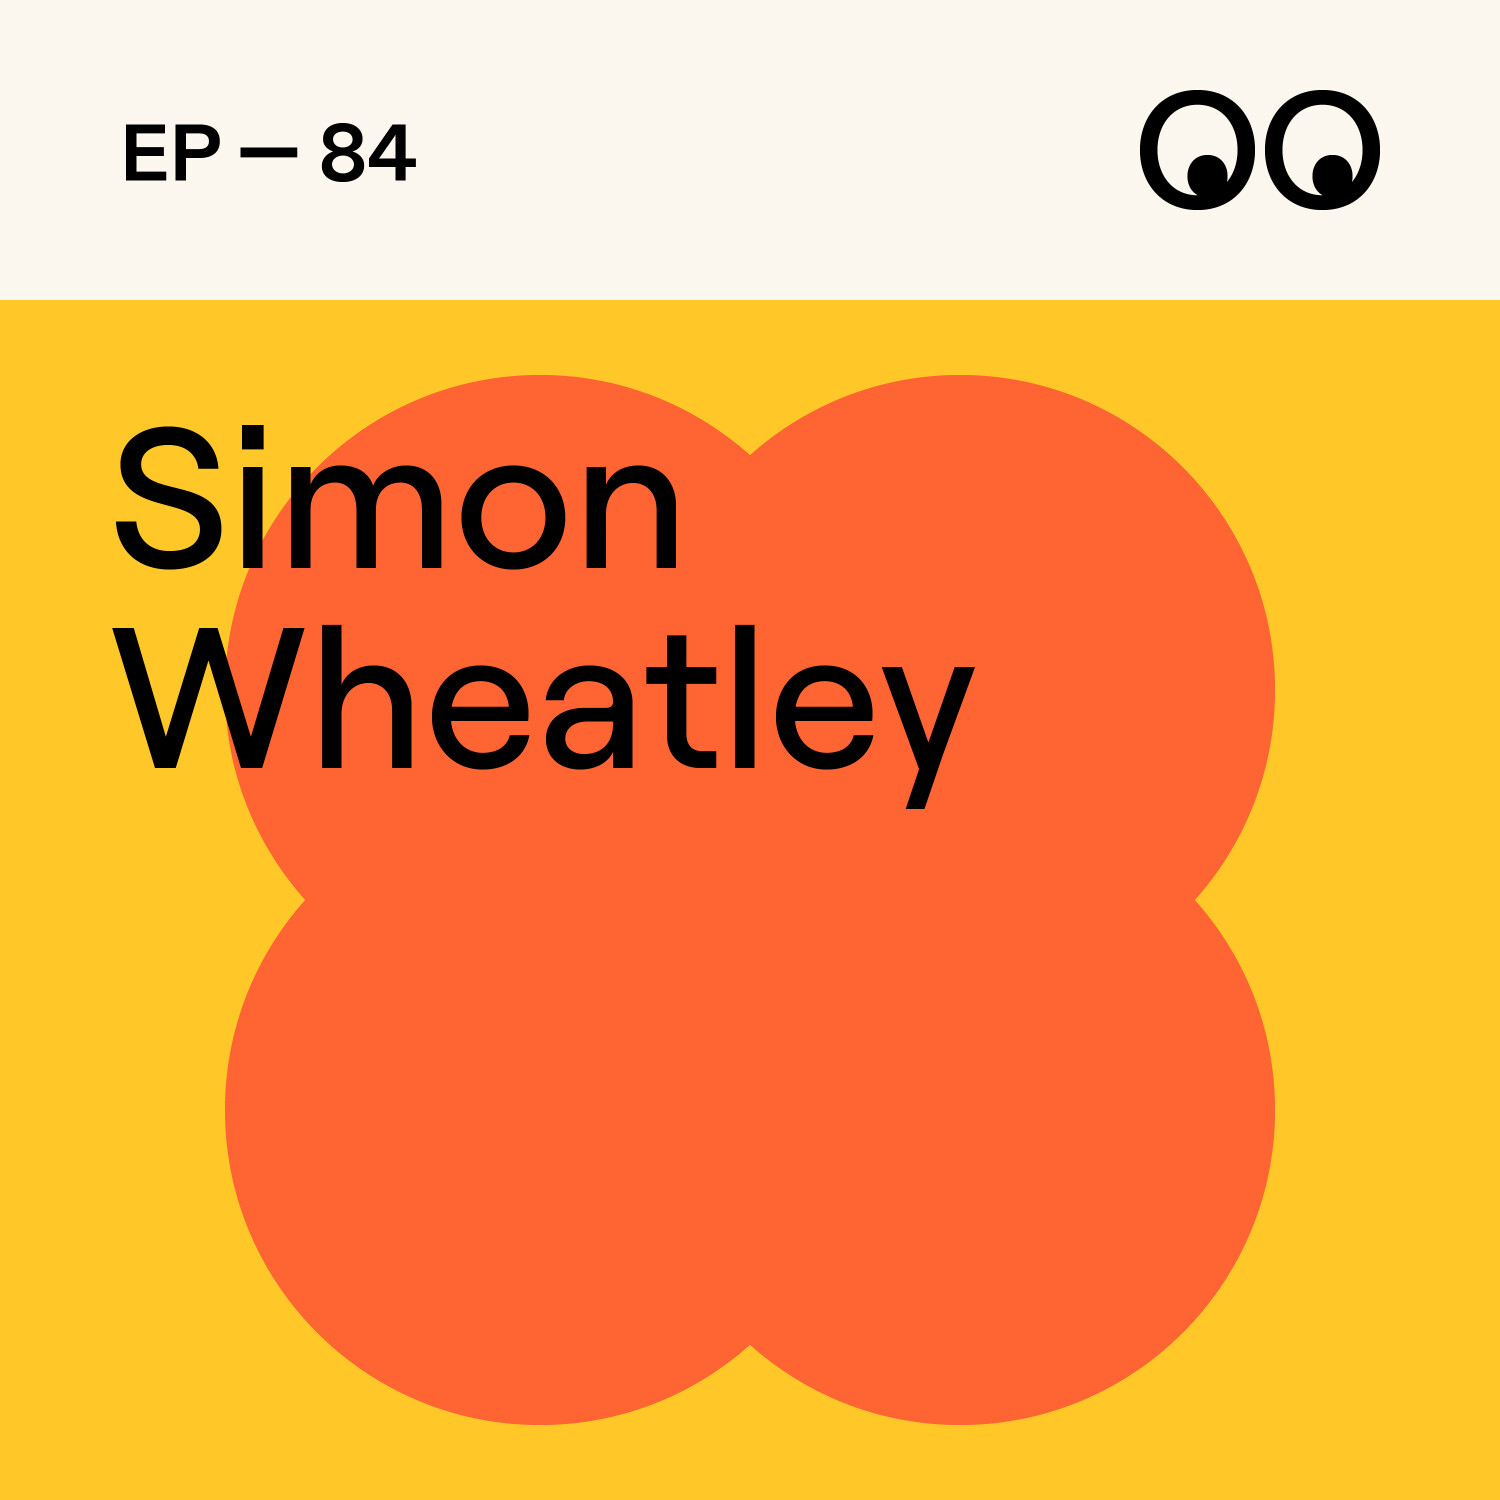 How being an outsider shapes a meaningful path, with Simon Wheatley